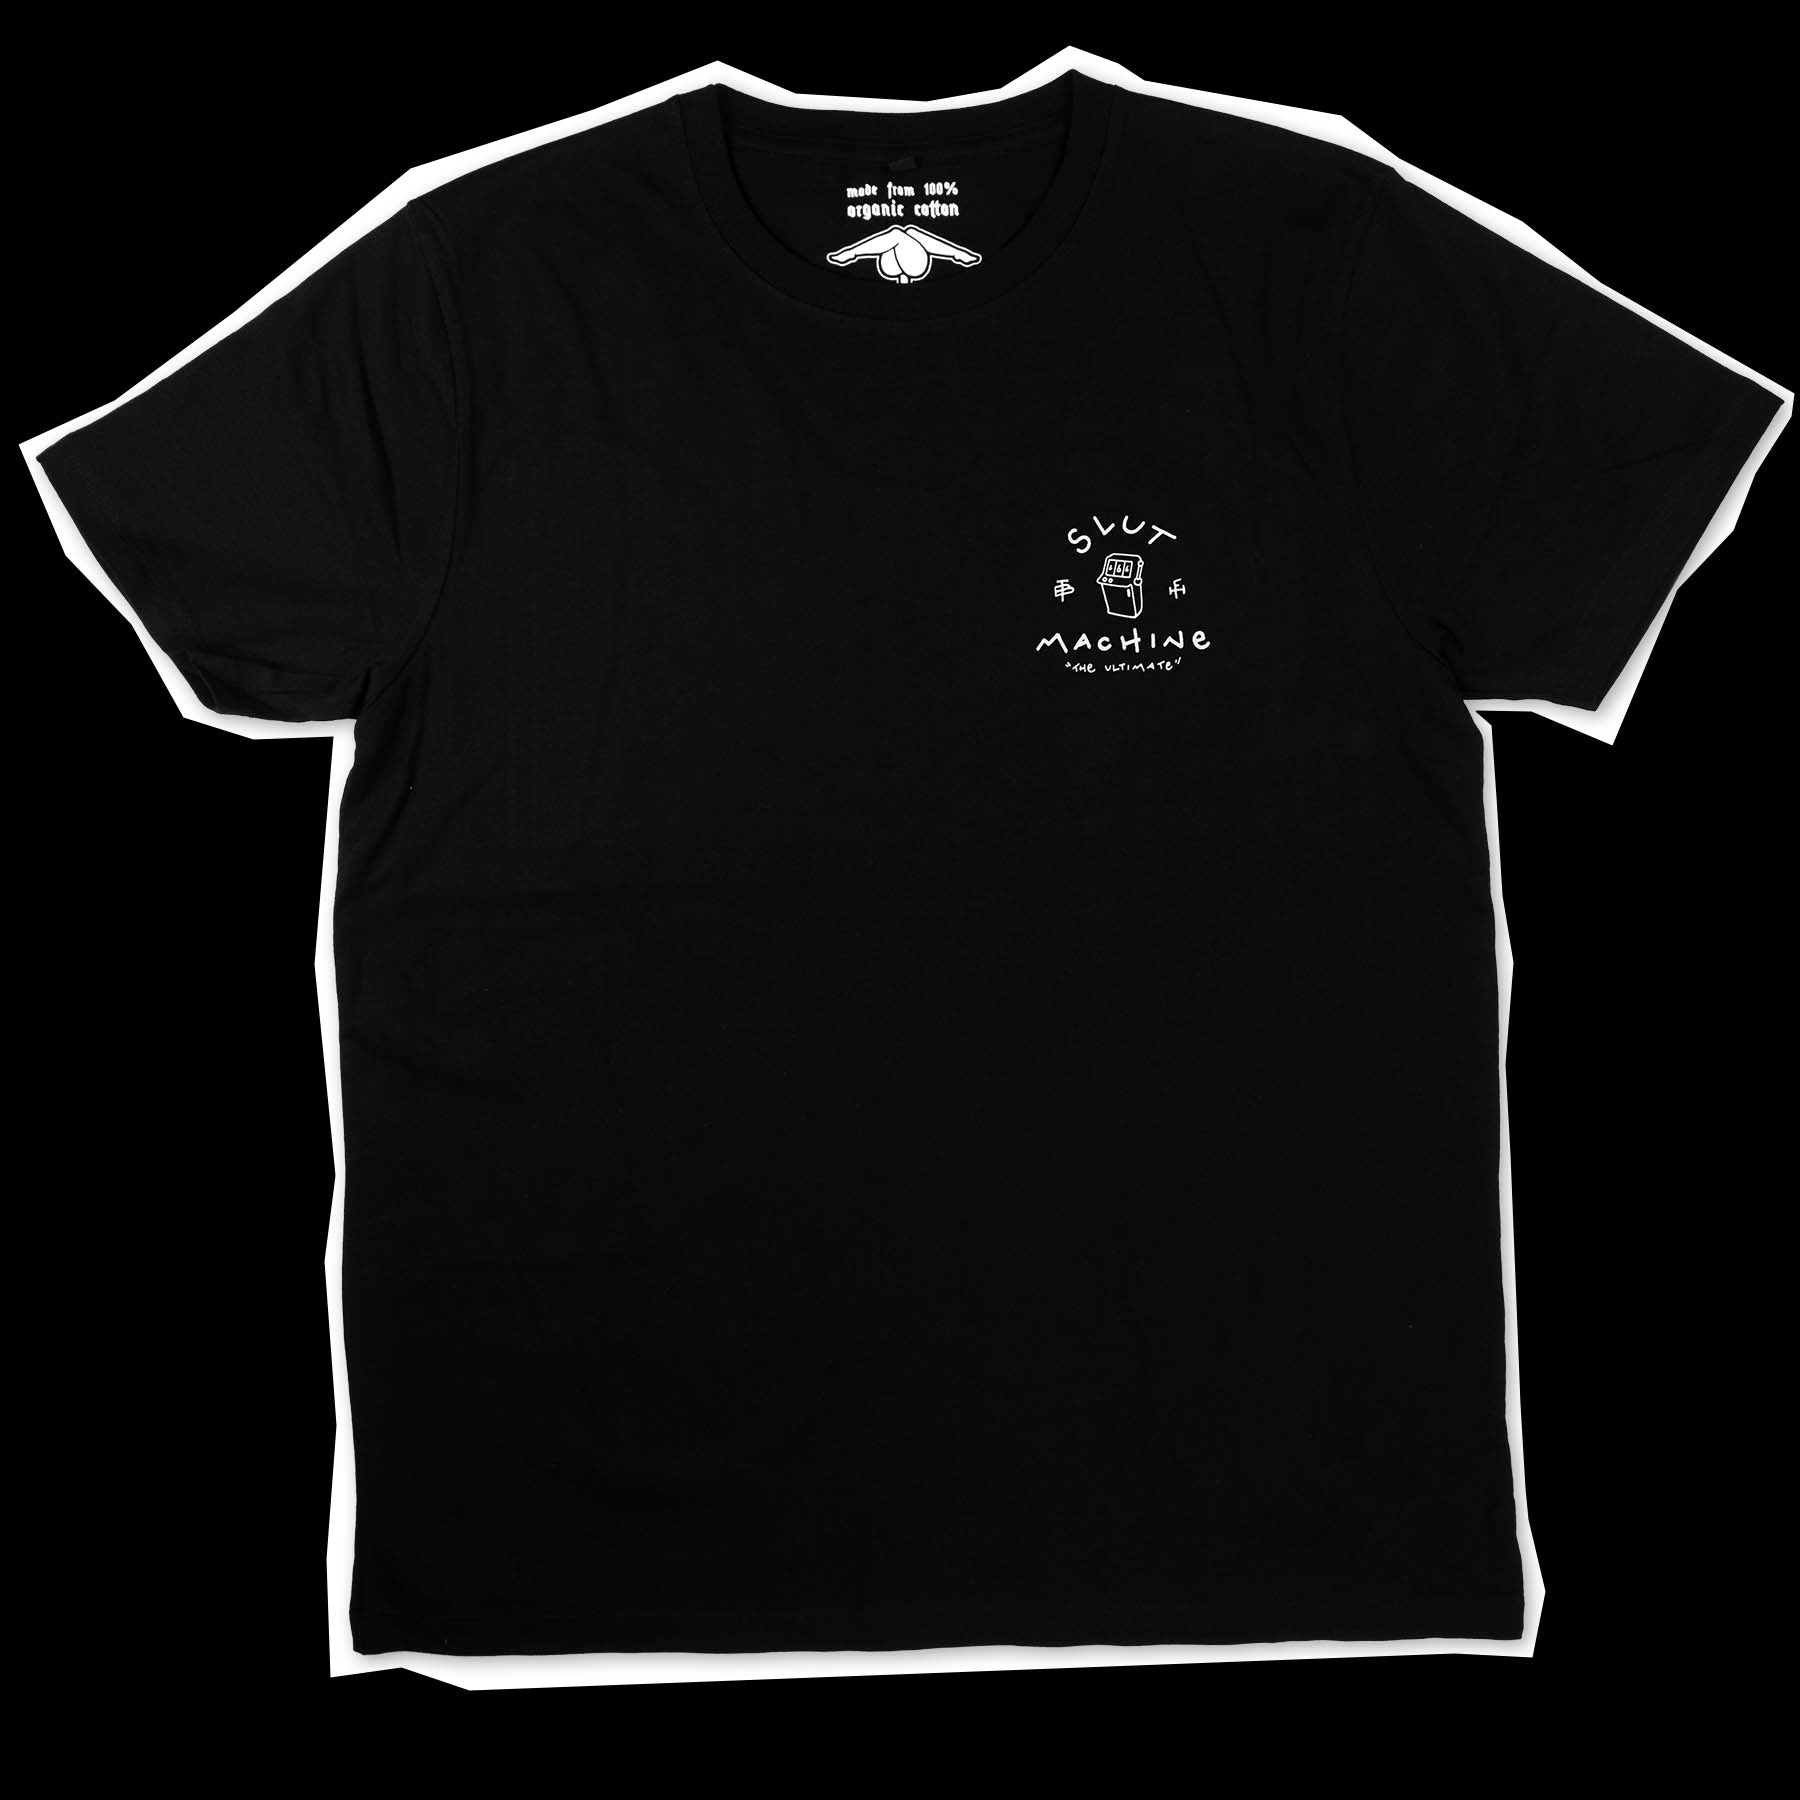 Black t-shirt with a slot machine and a white text screen-printed which says "slut machine" and "the ultimate" on the left chest